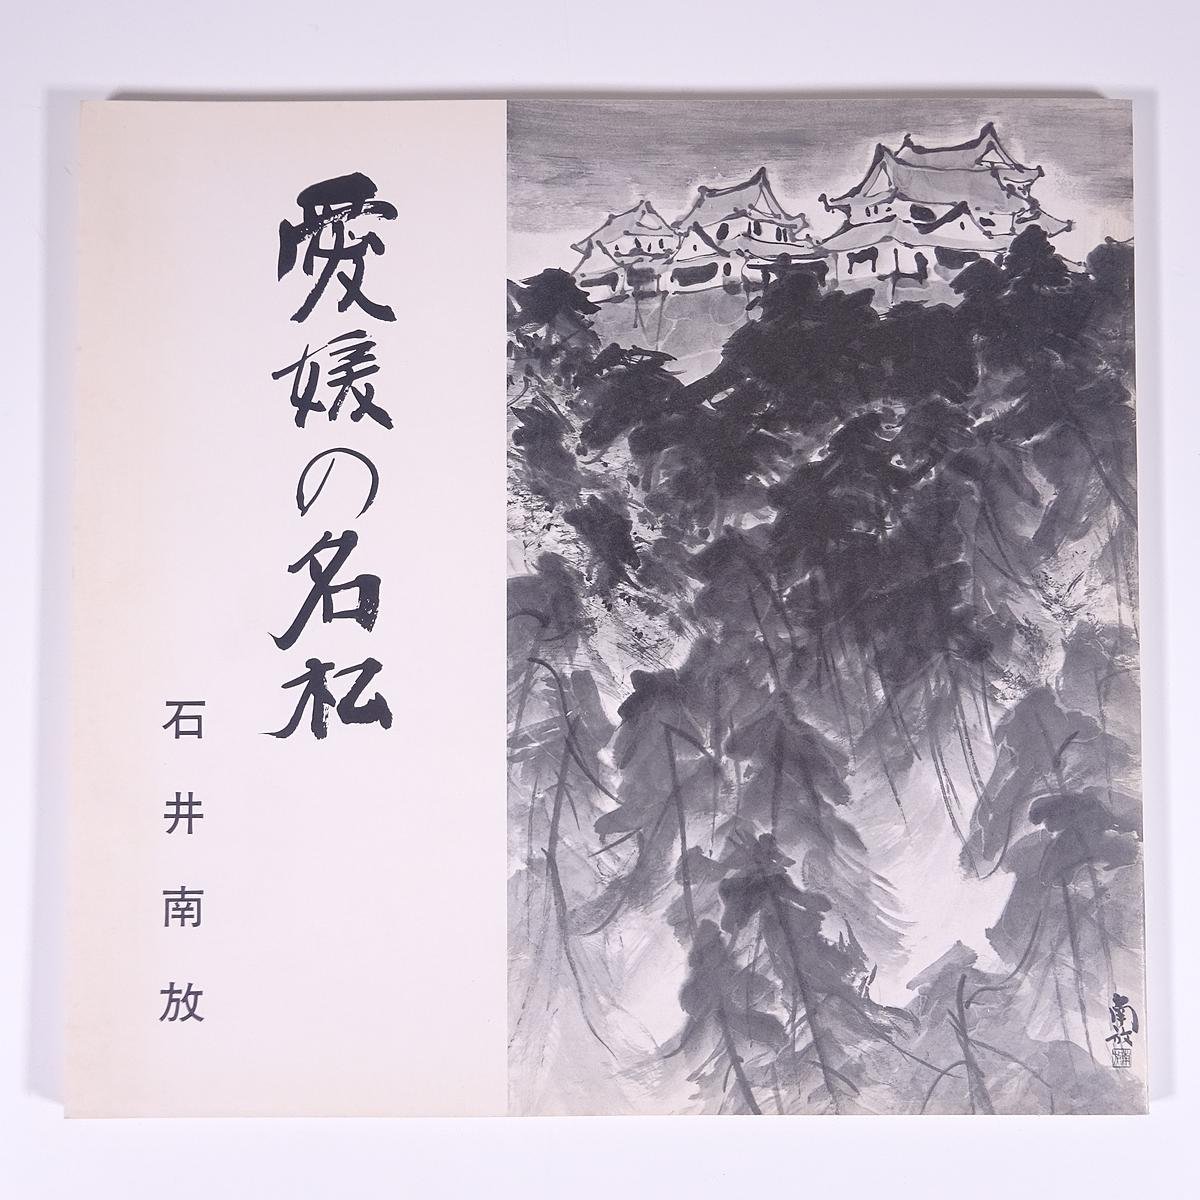 Ehime's famous pine trees, Ishii Nanpo, Ehime Prefectural Museum of Art, 1982, large book, exhibition, illustration, catalog, art, fine art, painting, art book, collection of works, Japanese painting, ink painting, Painting, Art Book, Collection, Catalog